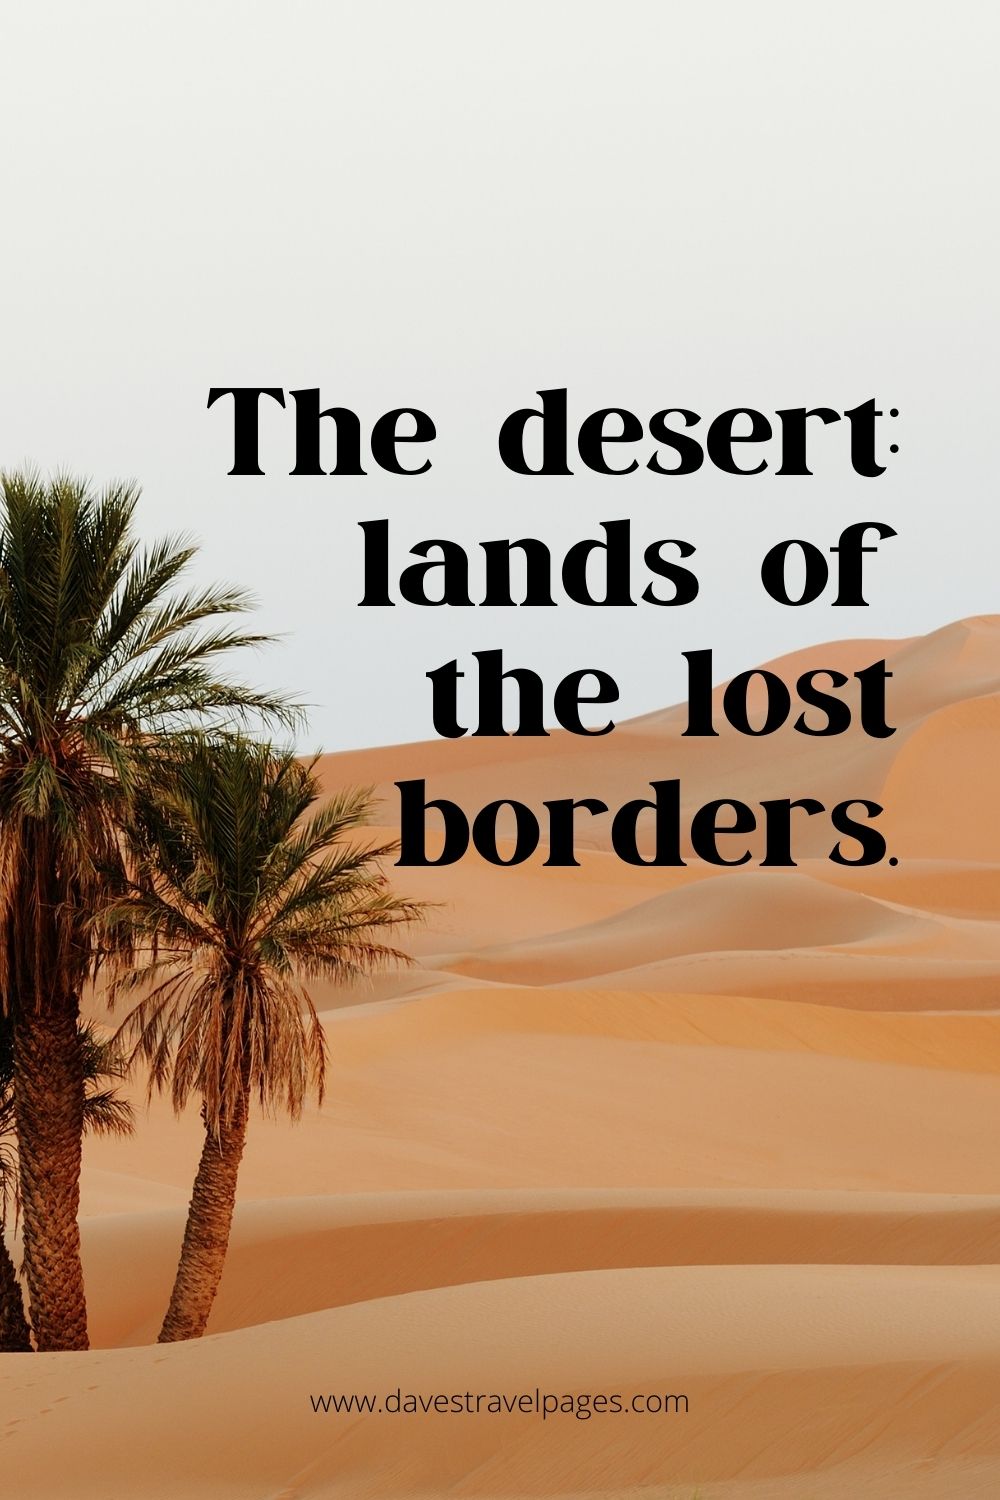 Desert Sands Captions And Quotes